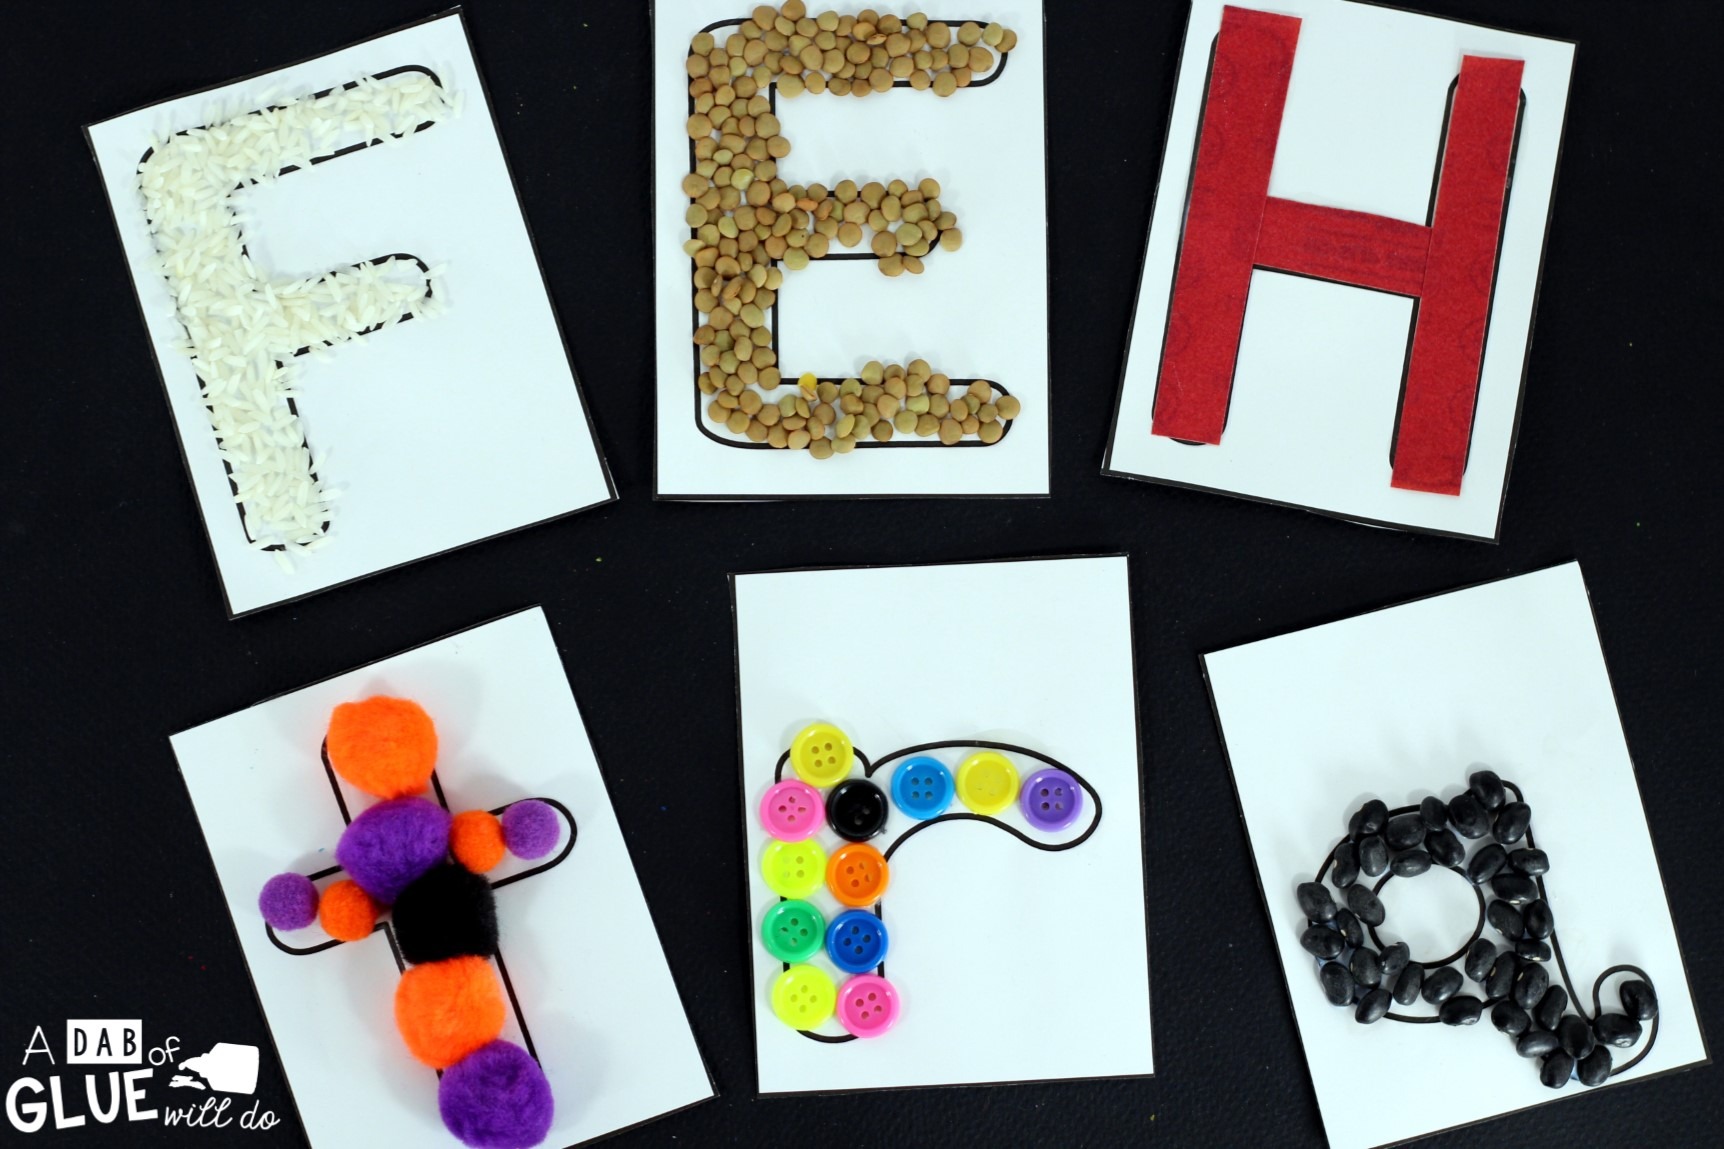 This DIY Tactile Alphabet Cards freebie is perfect for preschool age students wanting to learn their letters and also a great back to school center for kindergarten students needing a little refresher.